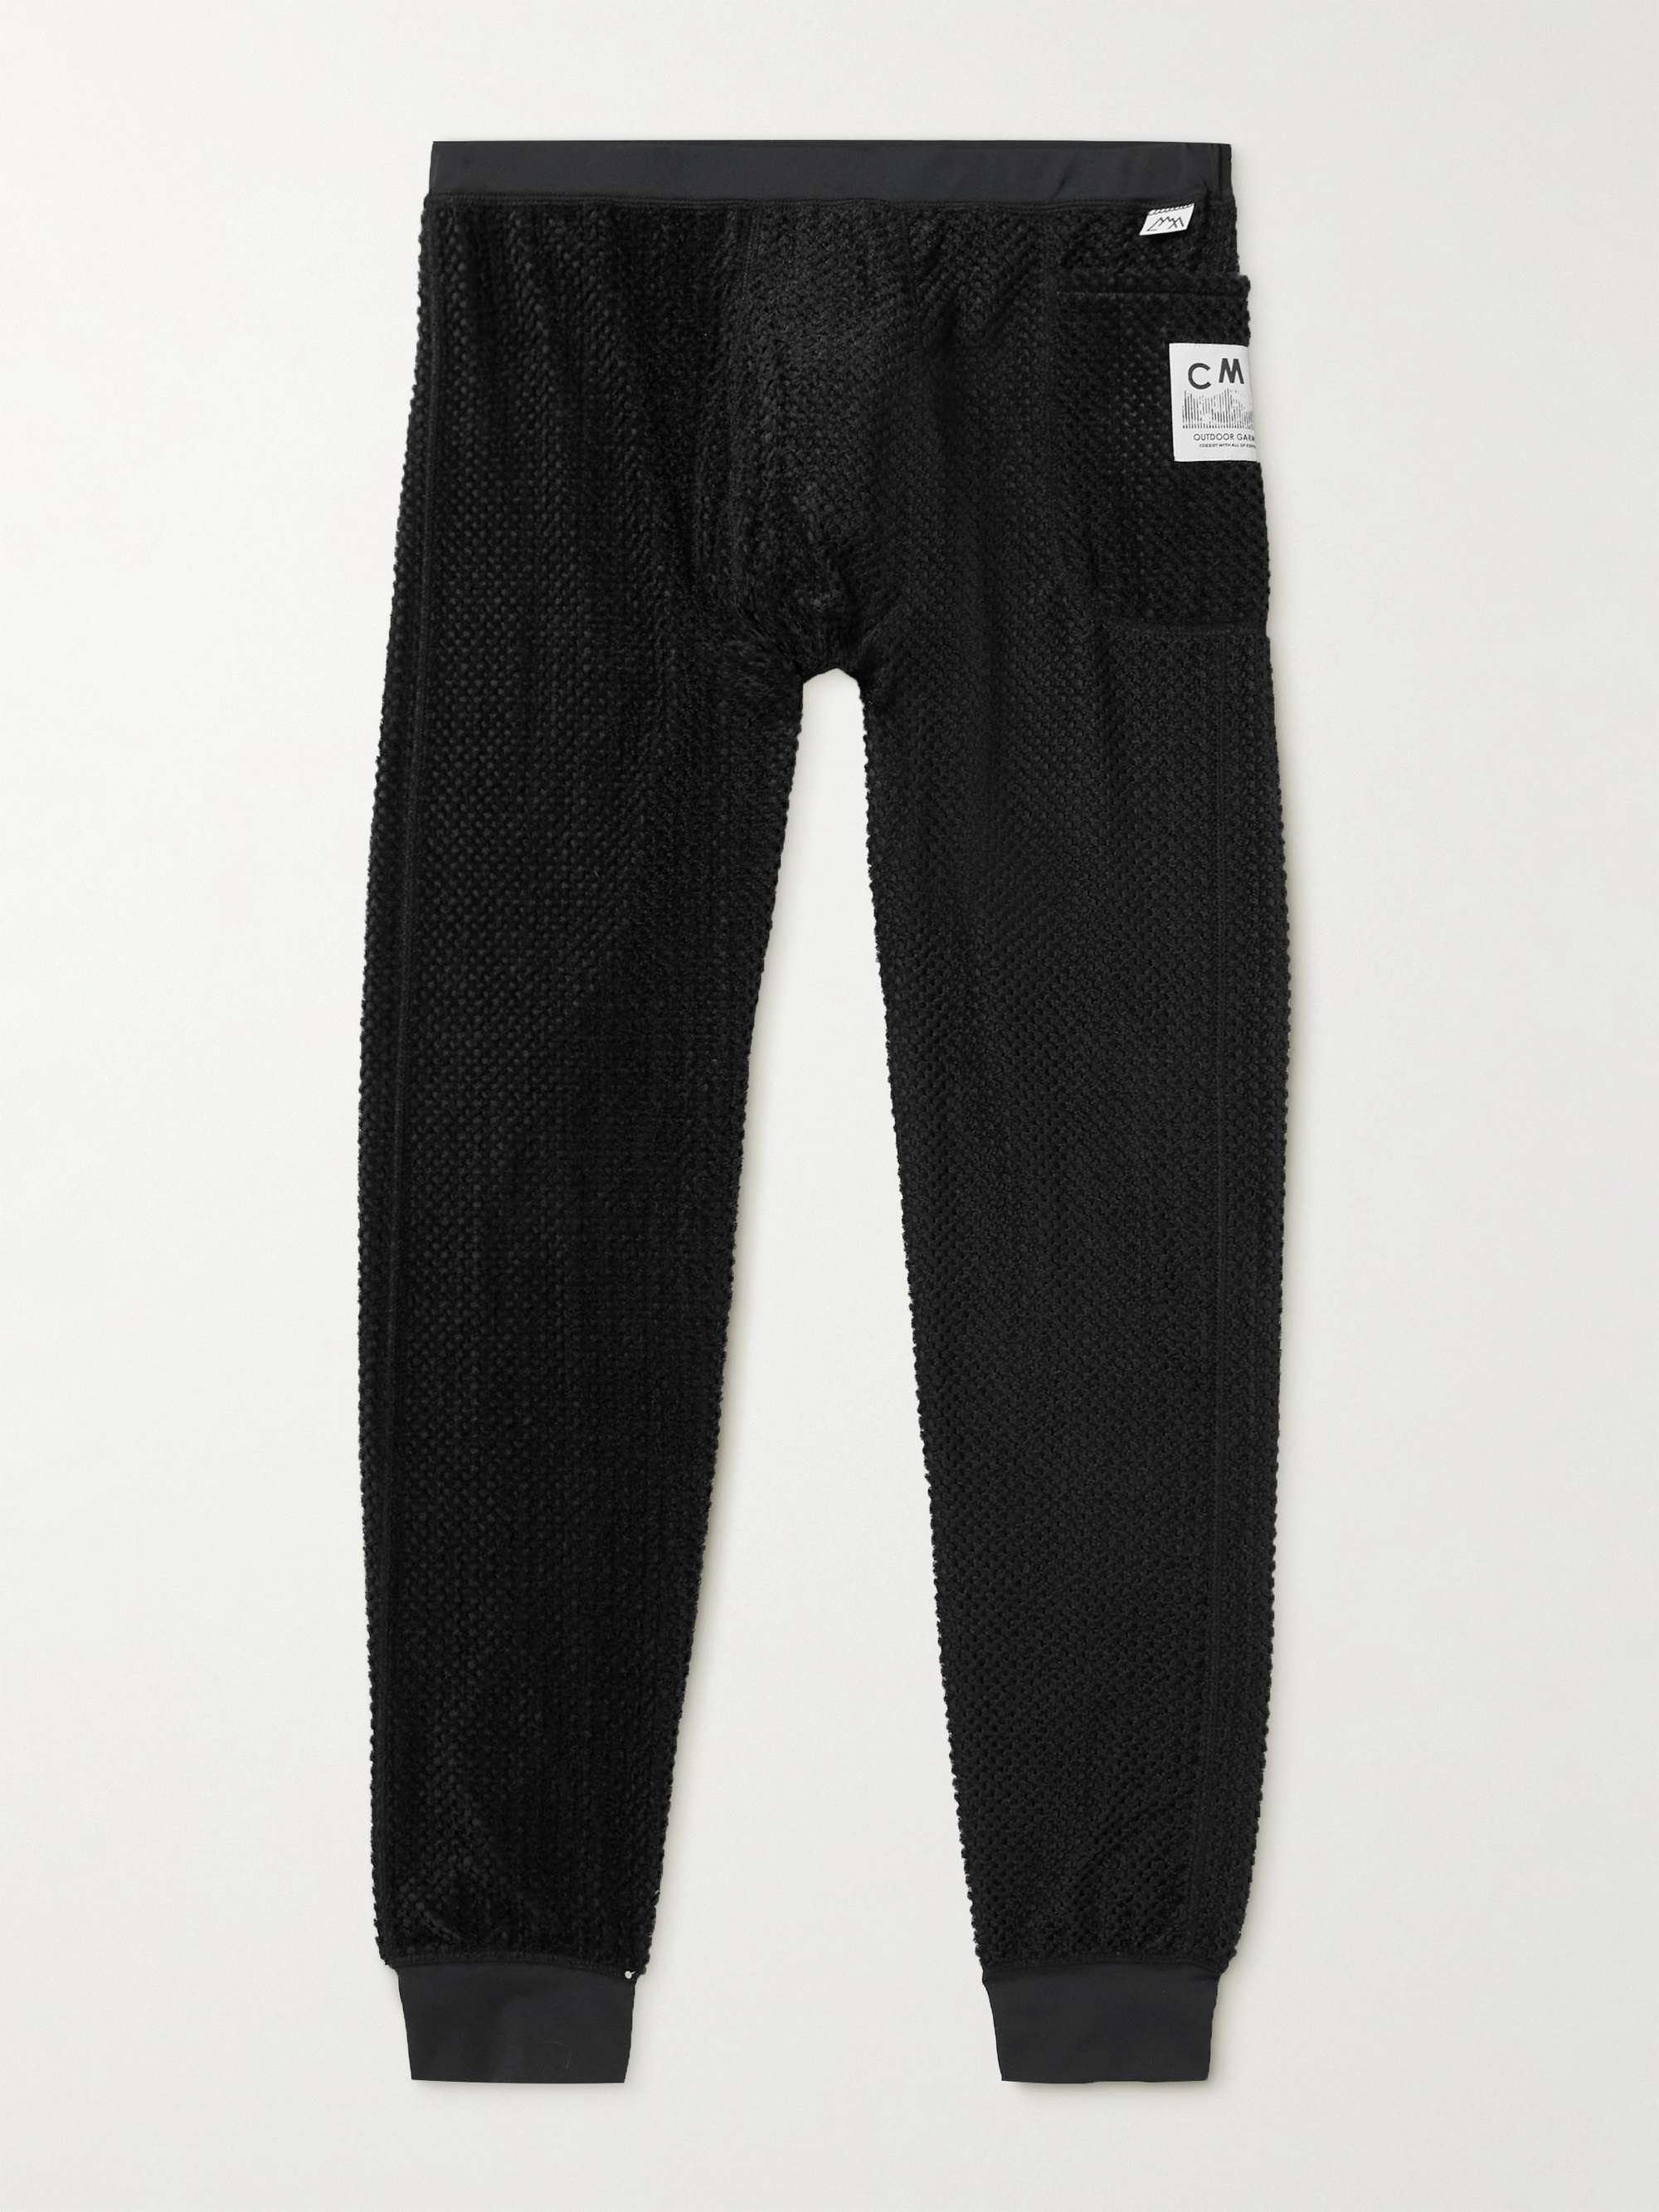 COMFY OUTDOOR GARMENT Octa Spats Tapered Jersey Sweatpants